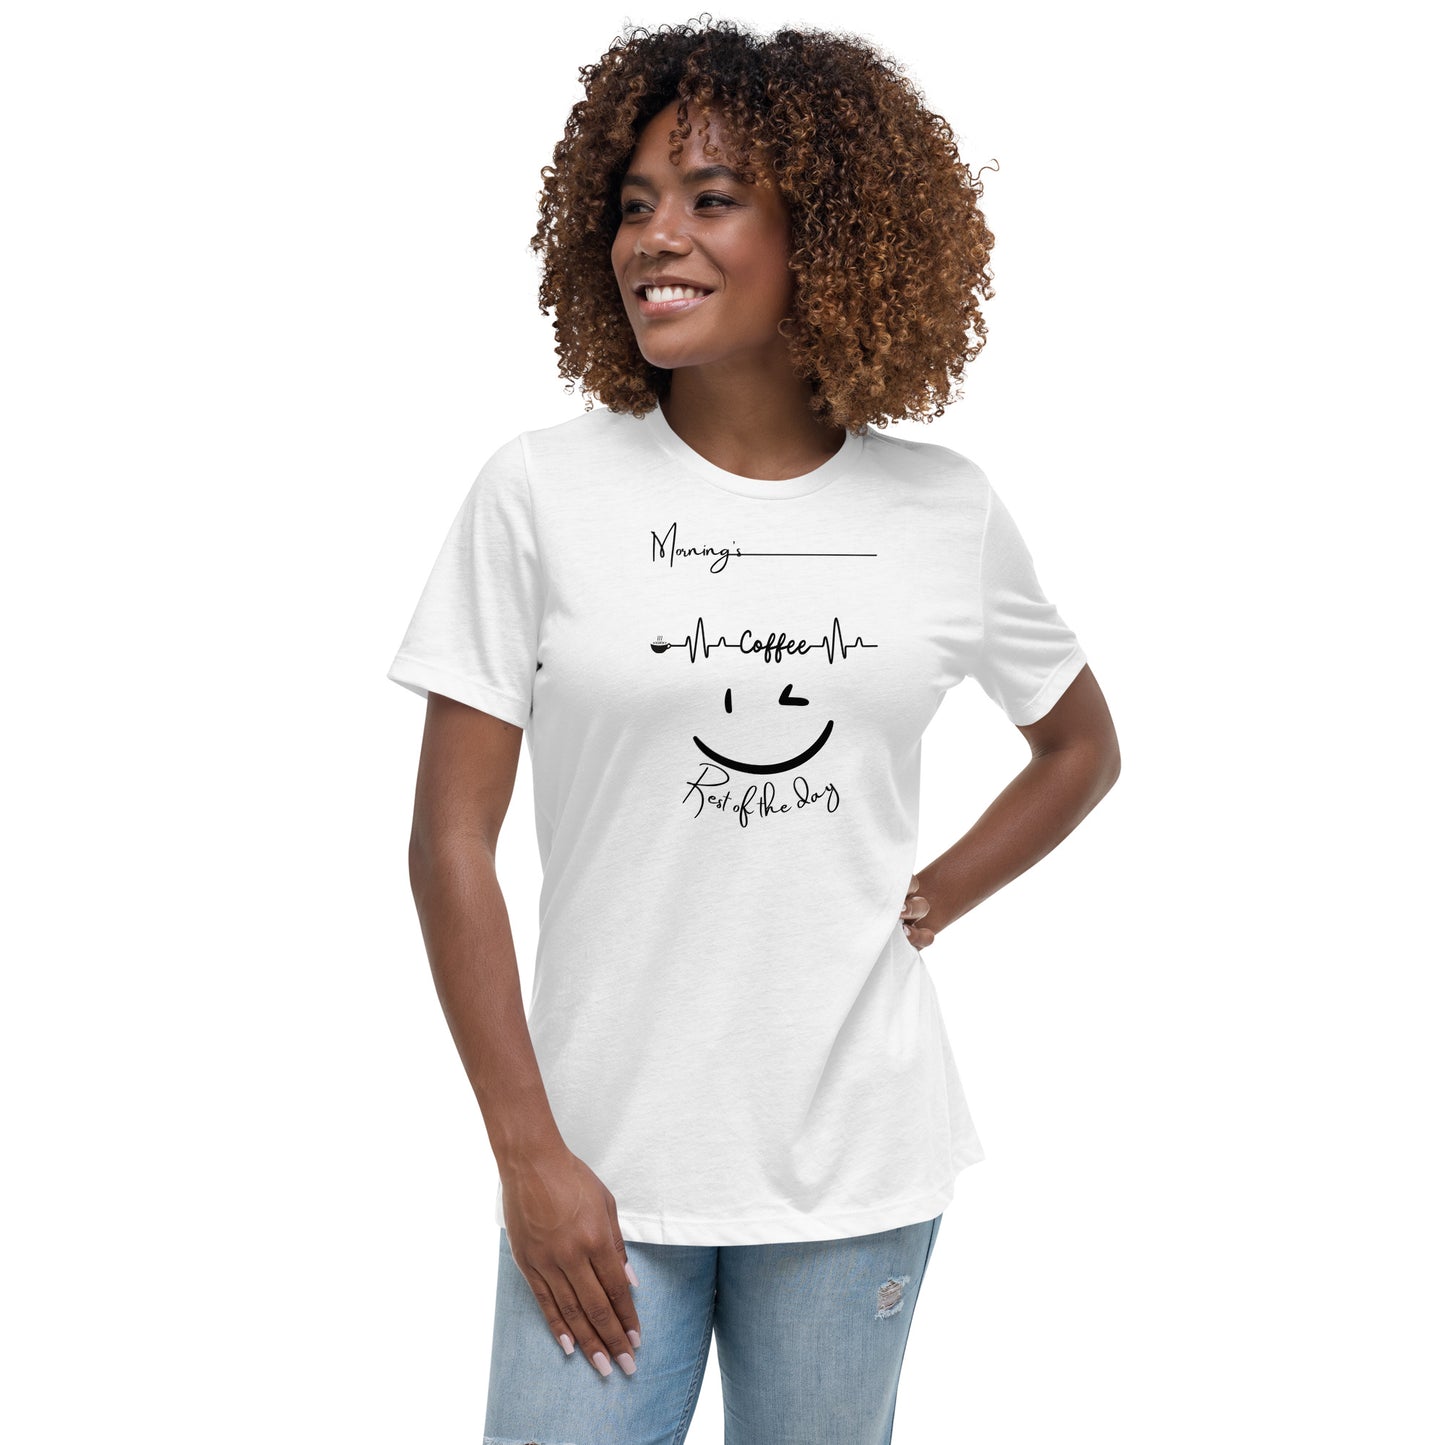 mornings, coffee, rest of the day Women's Relaxed T-Shirt